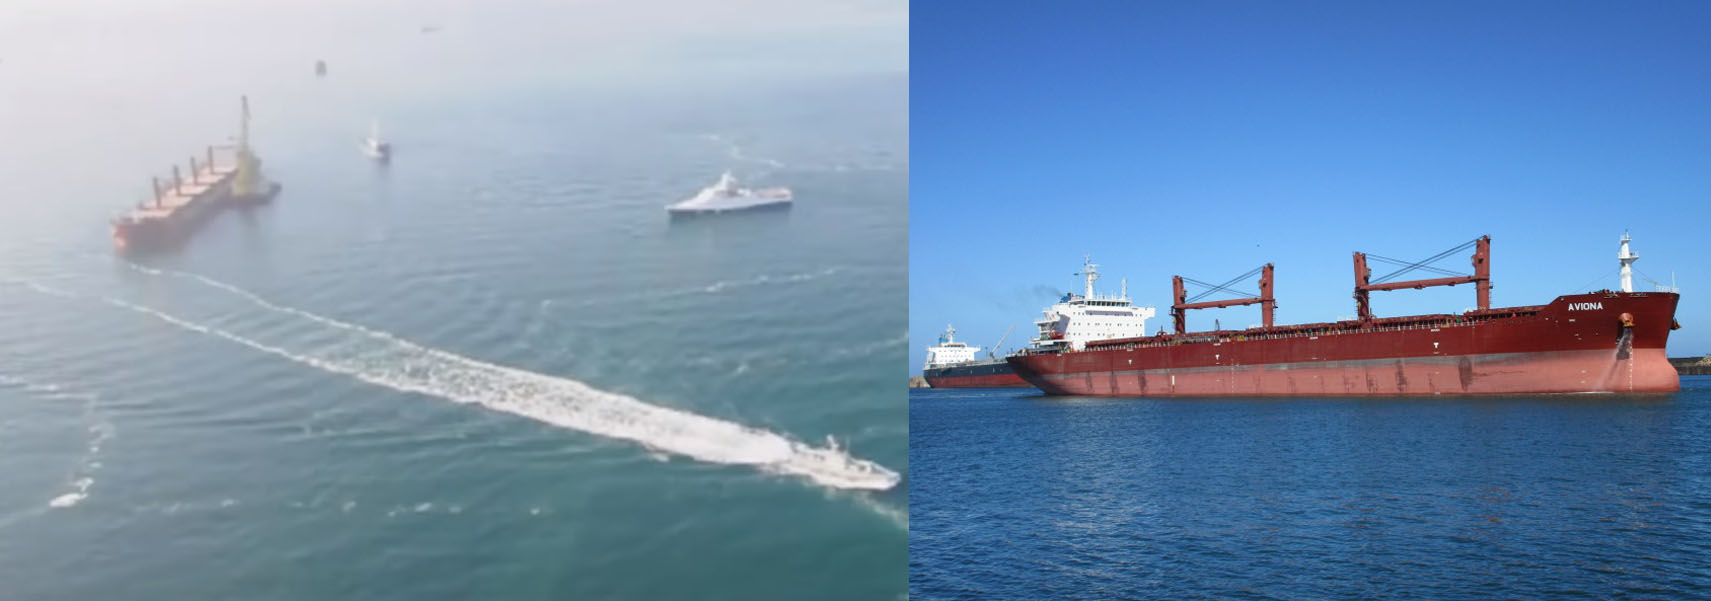 Image 6: Comparison of the large red ship in Zvezda footage and an image of the bulk carrier 'Aviona'